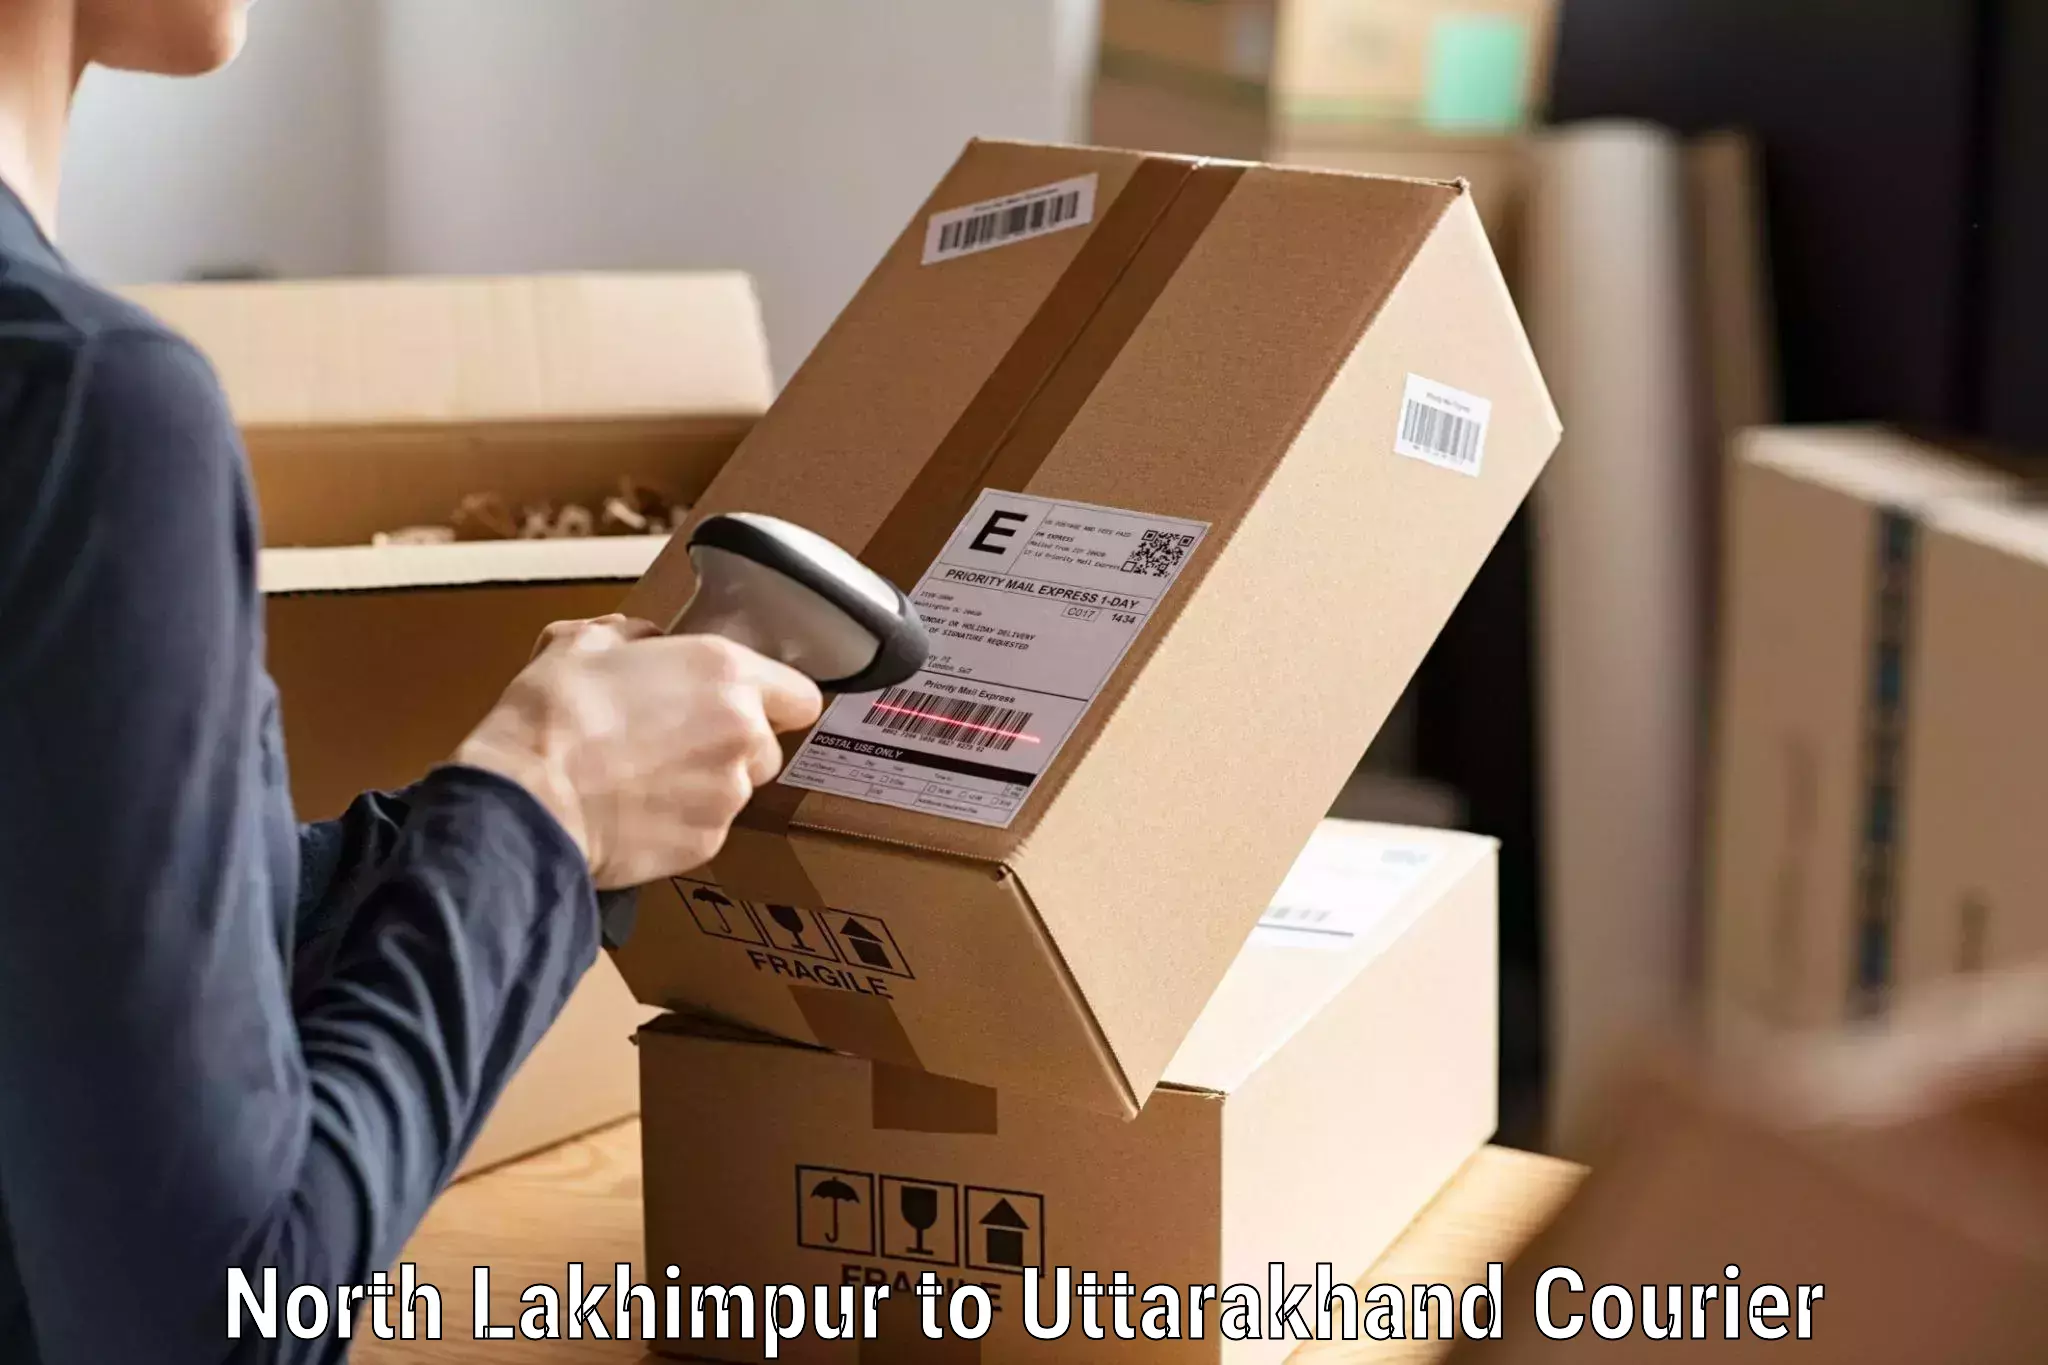 On-demand courier North Lakhimpur to Almora